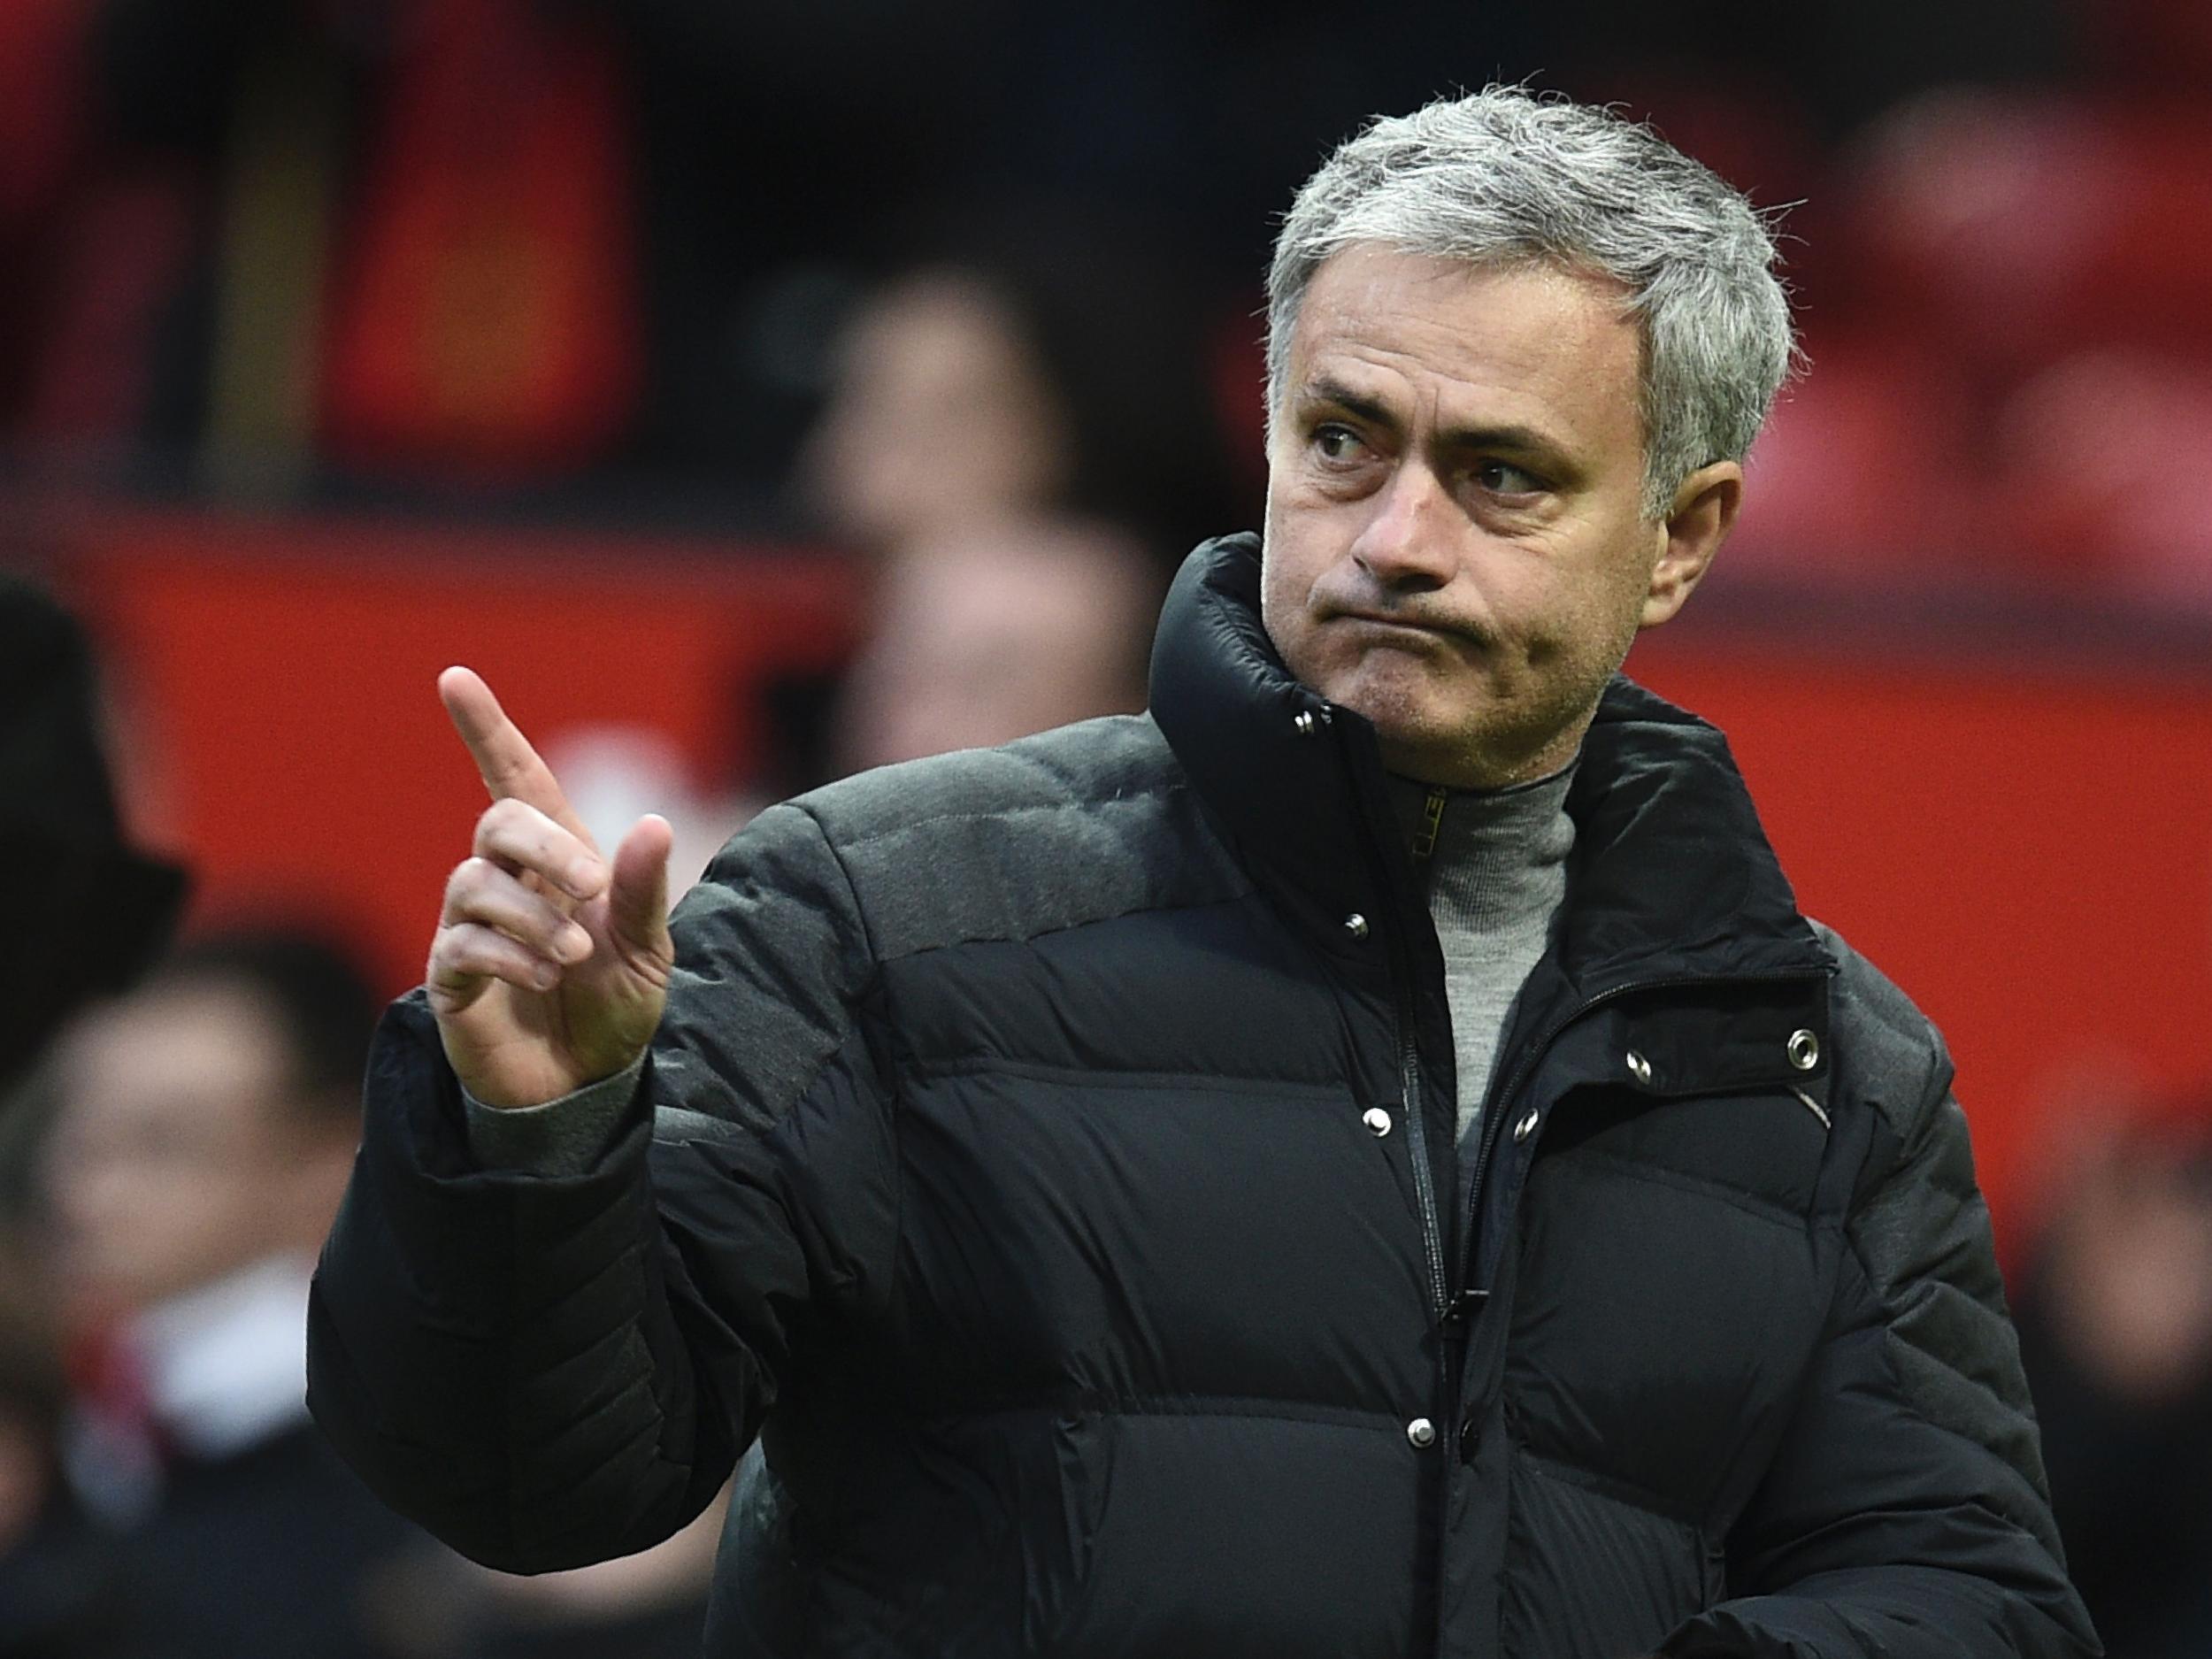 Mourinho is looking to continue his love affair with the League Cup